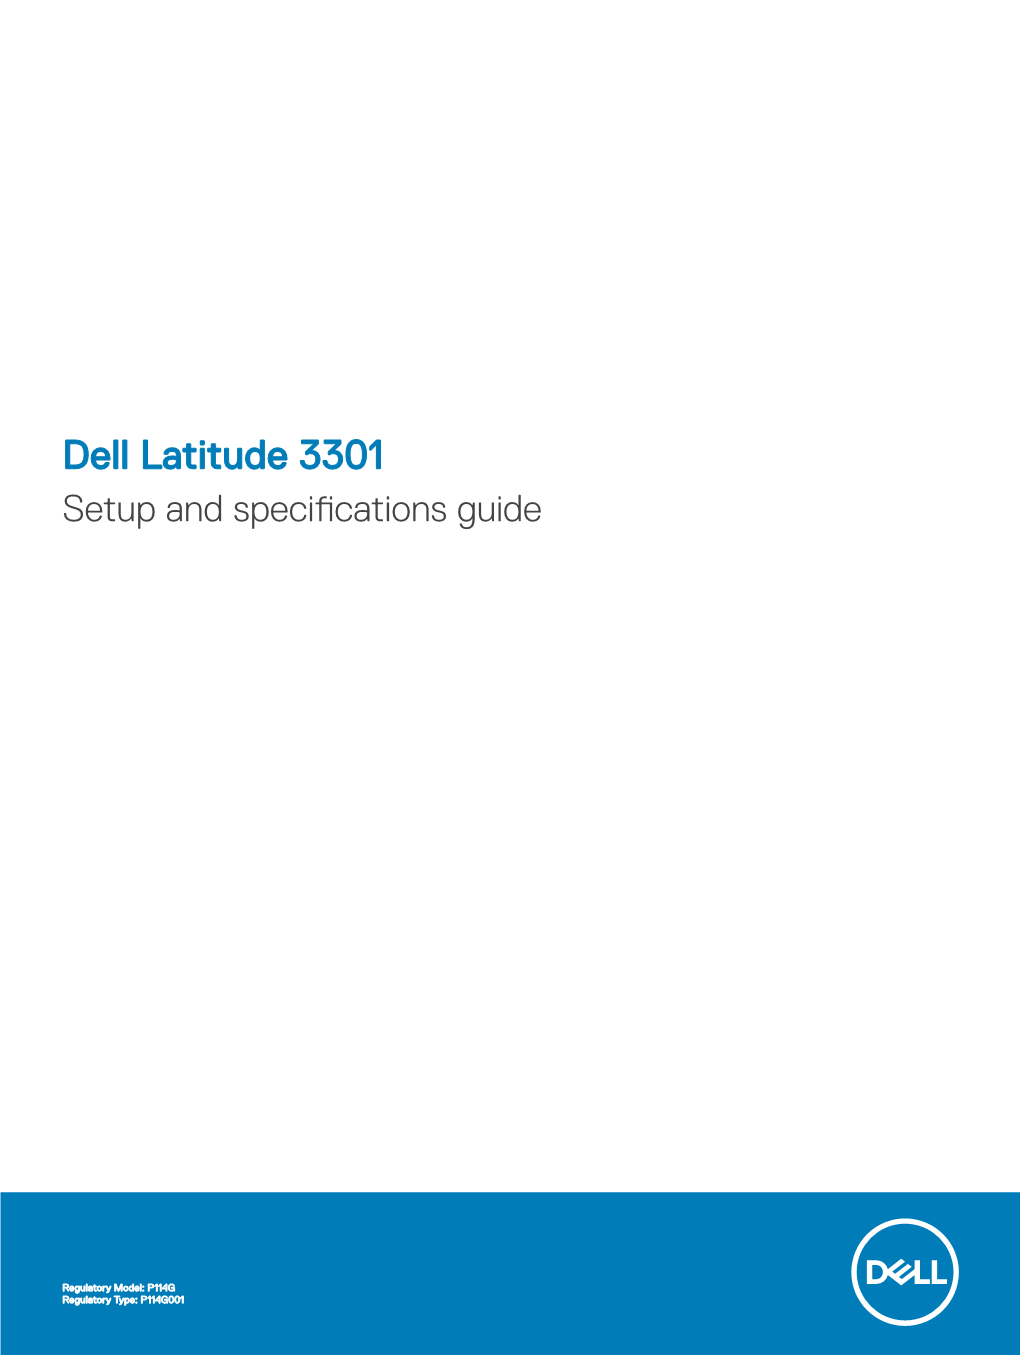 Dell Latitude 3301 Setup and Specifications Guide